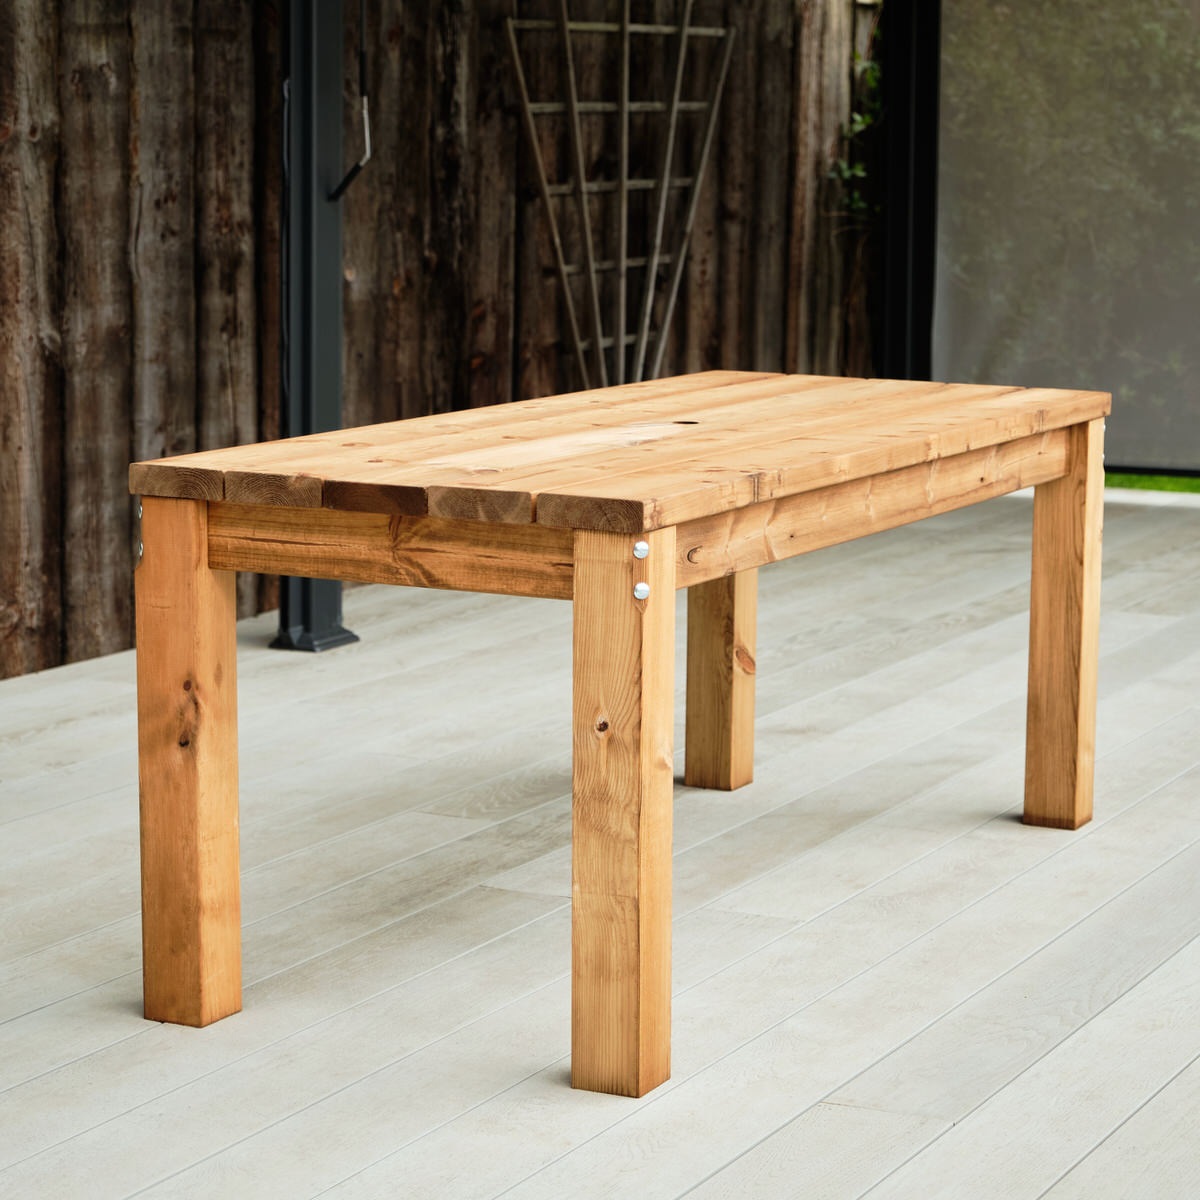 Wooden Rectangular Table And Bench Set, Timber Outdoor Bench Dining Table